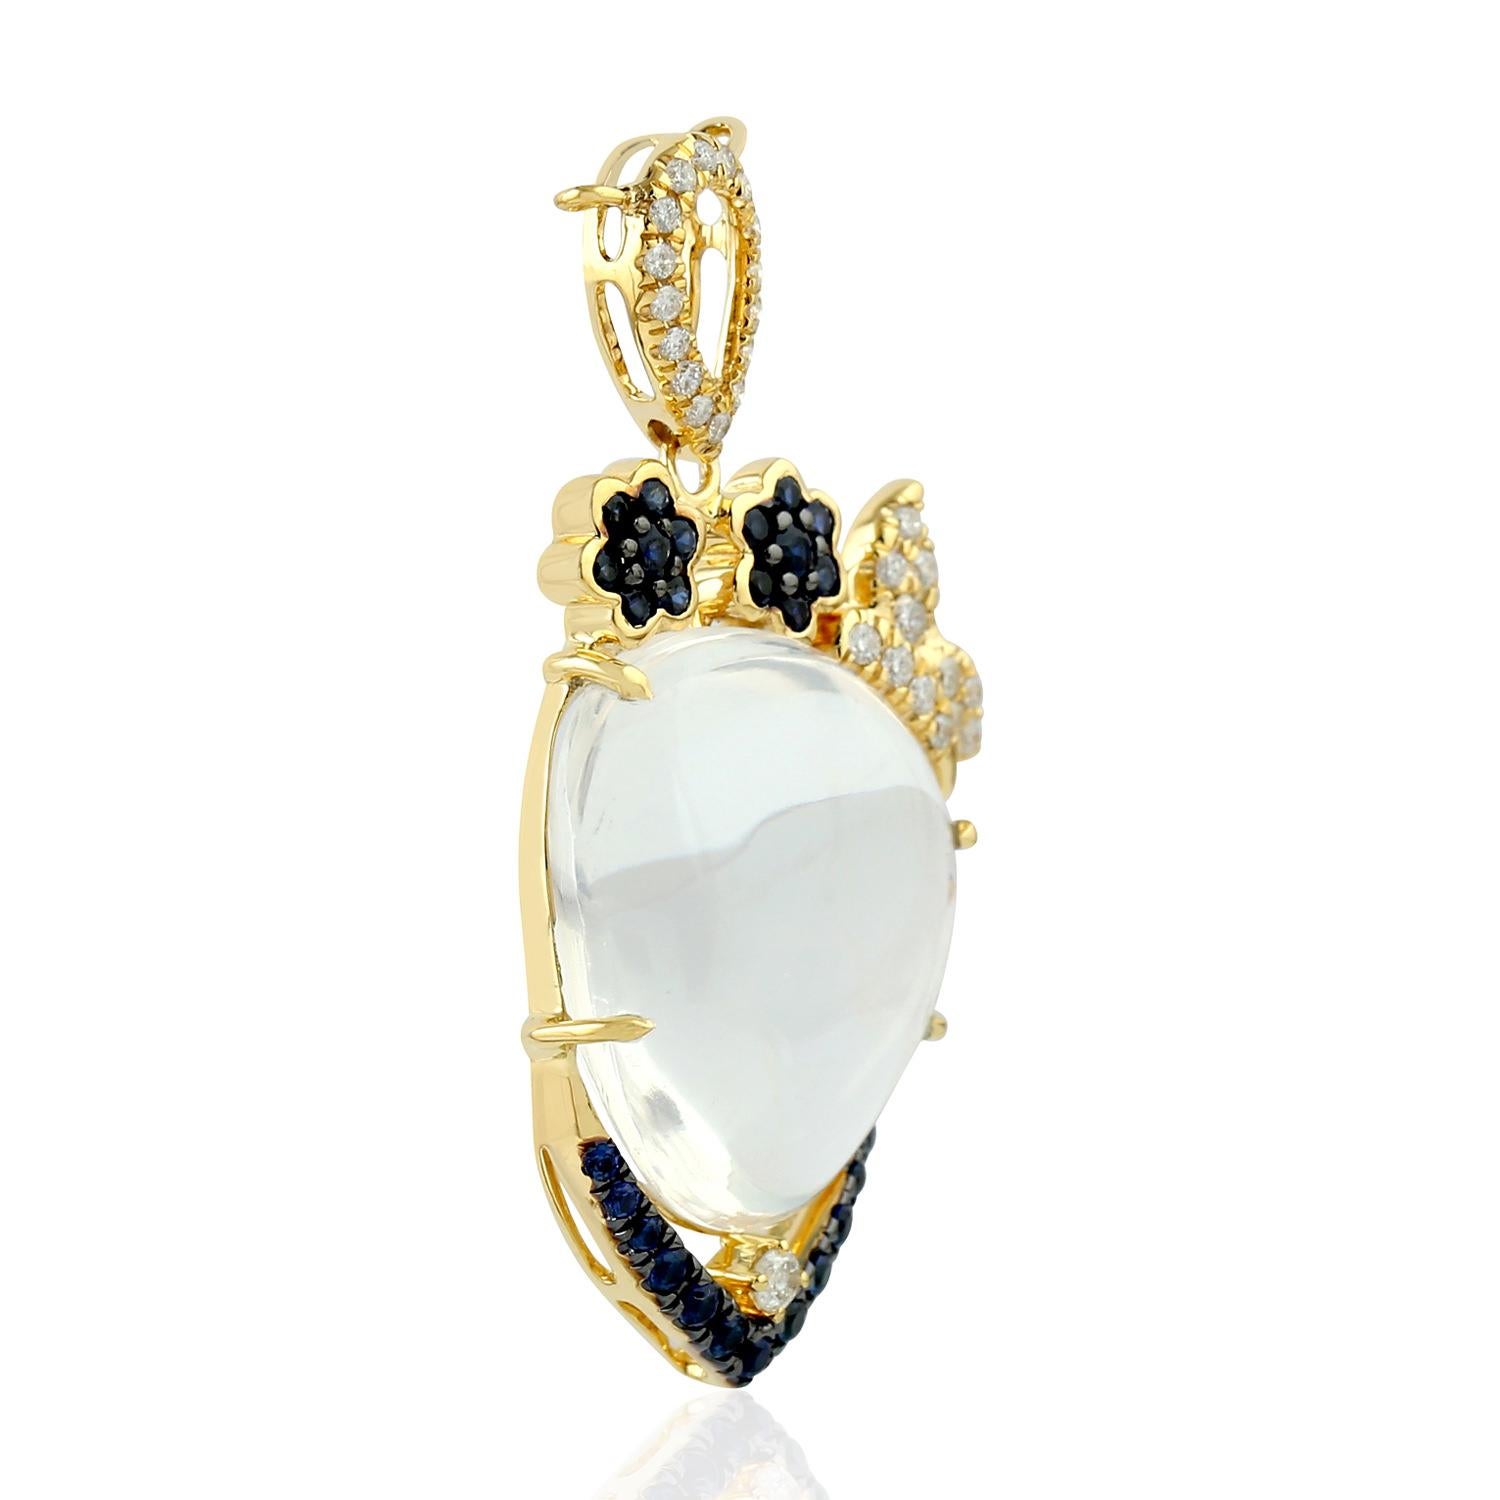 Cast in 18 Karat gold, this beautiful pendant features 15.66 carats opal, .63 carat blue sapphire & .29 carats of sparkling diamonds. 

FOLLOW  MEGHNA JEWELS storefront to view the latest collection & exclusive pieces.  Meghna Jewels is proudly